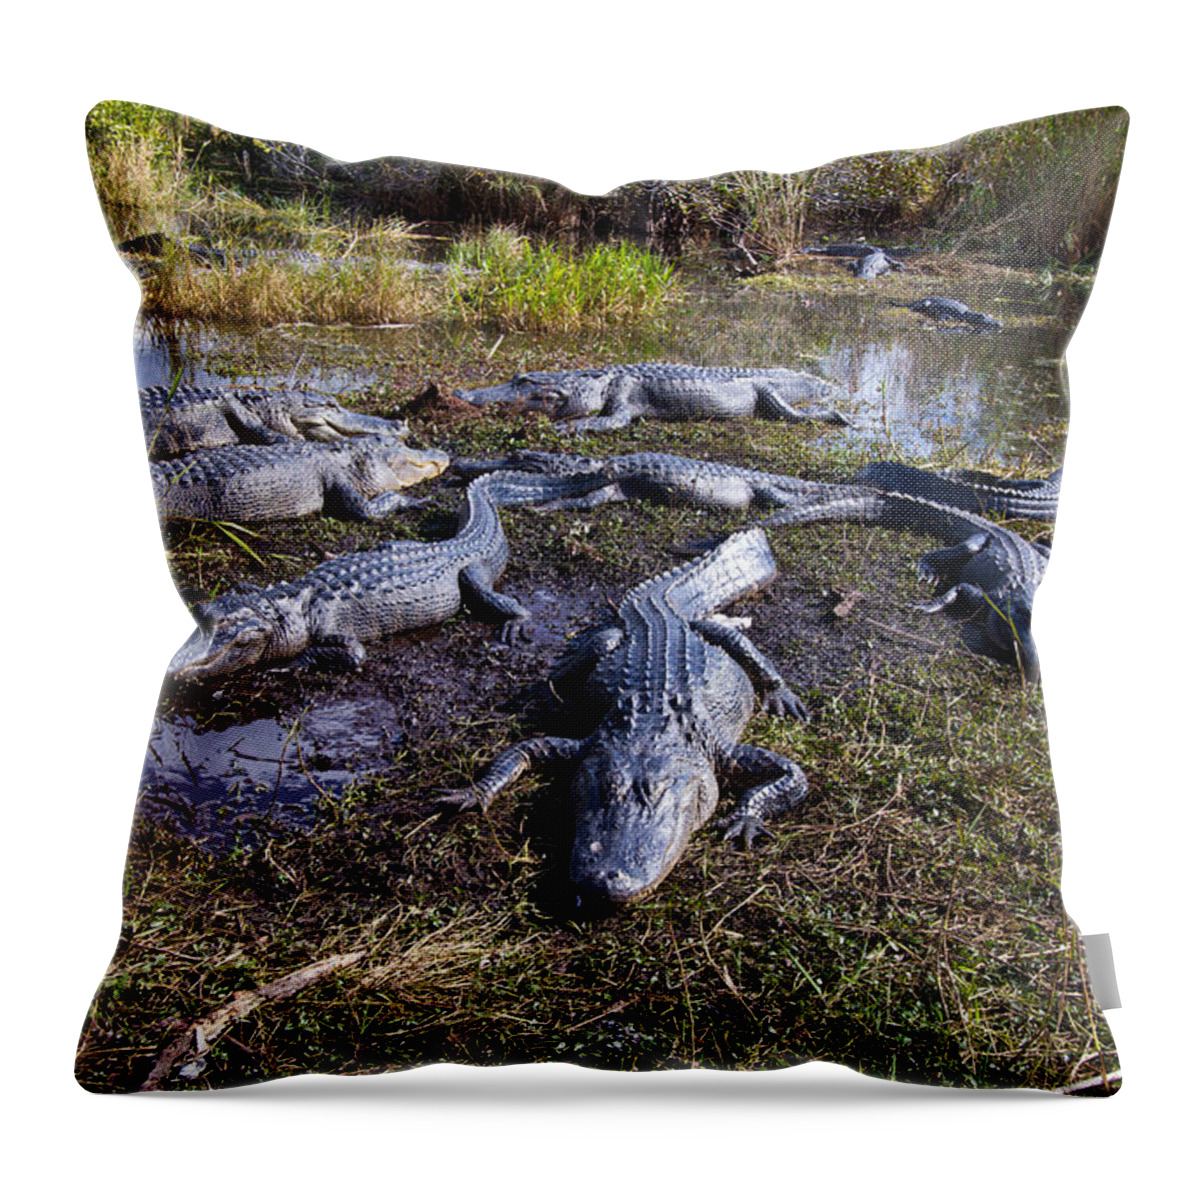 Nature Throw Pillow featuring the photograph Alligators 280 by Michael Fryd